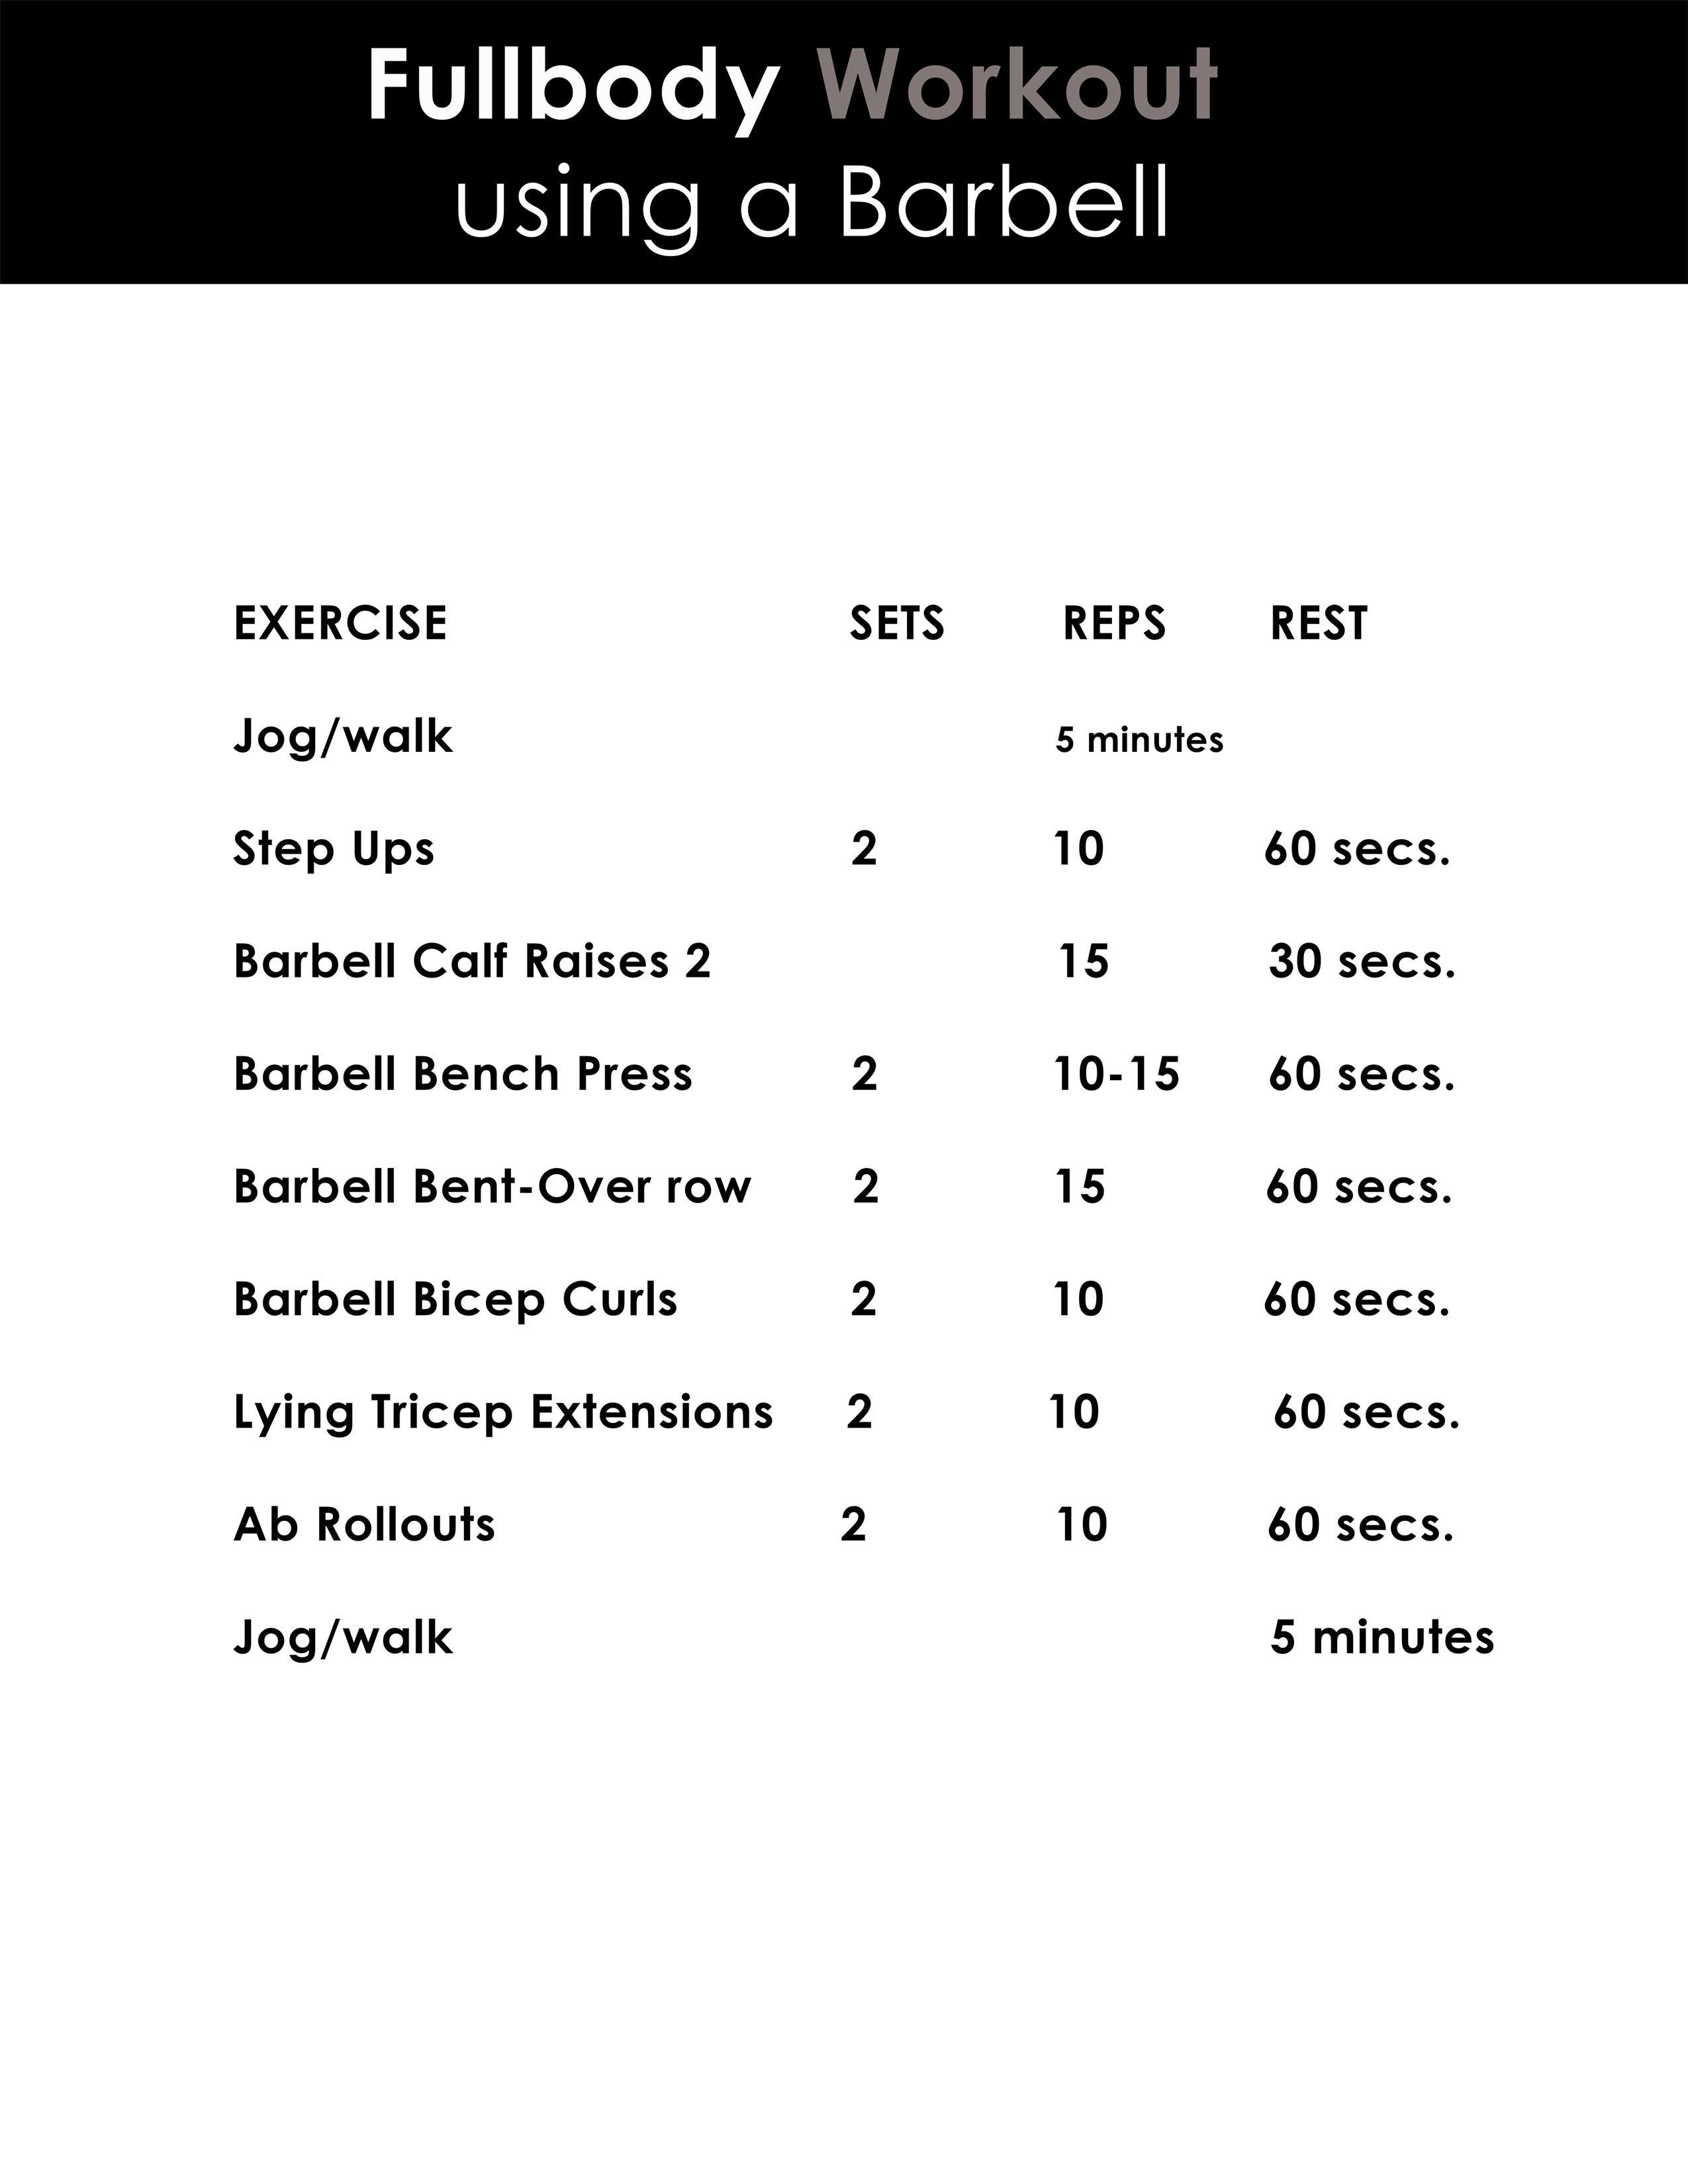 Fullbody barbell workout you can download and print.